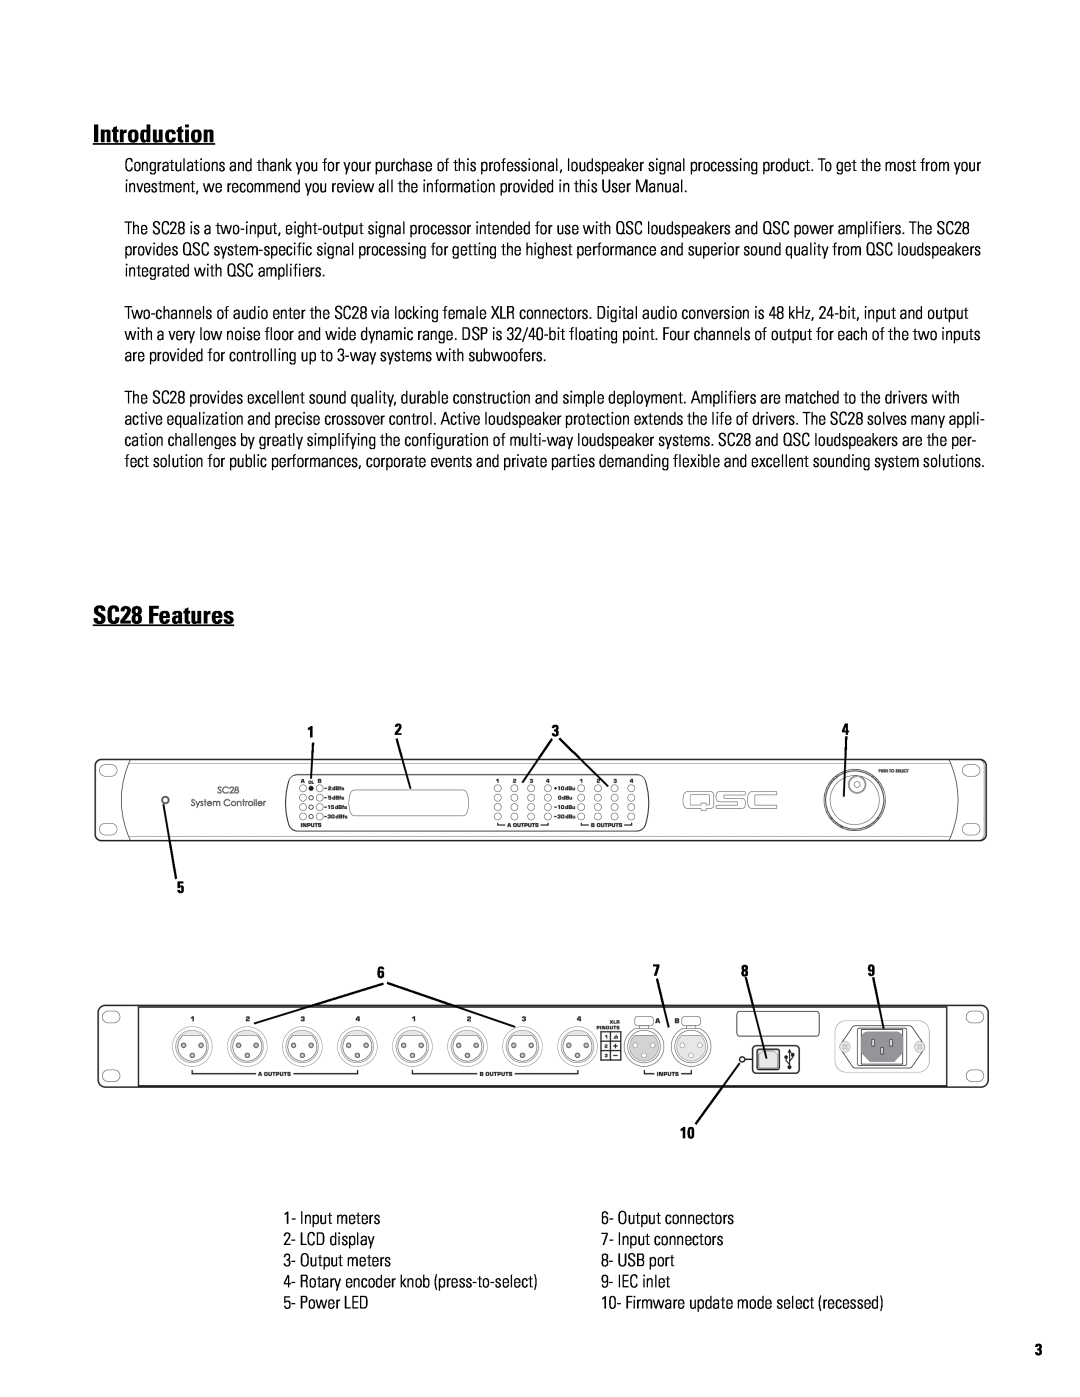 QSC Audio user manual Introduction, SC28 Features 